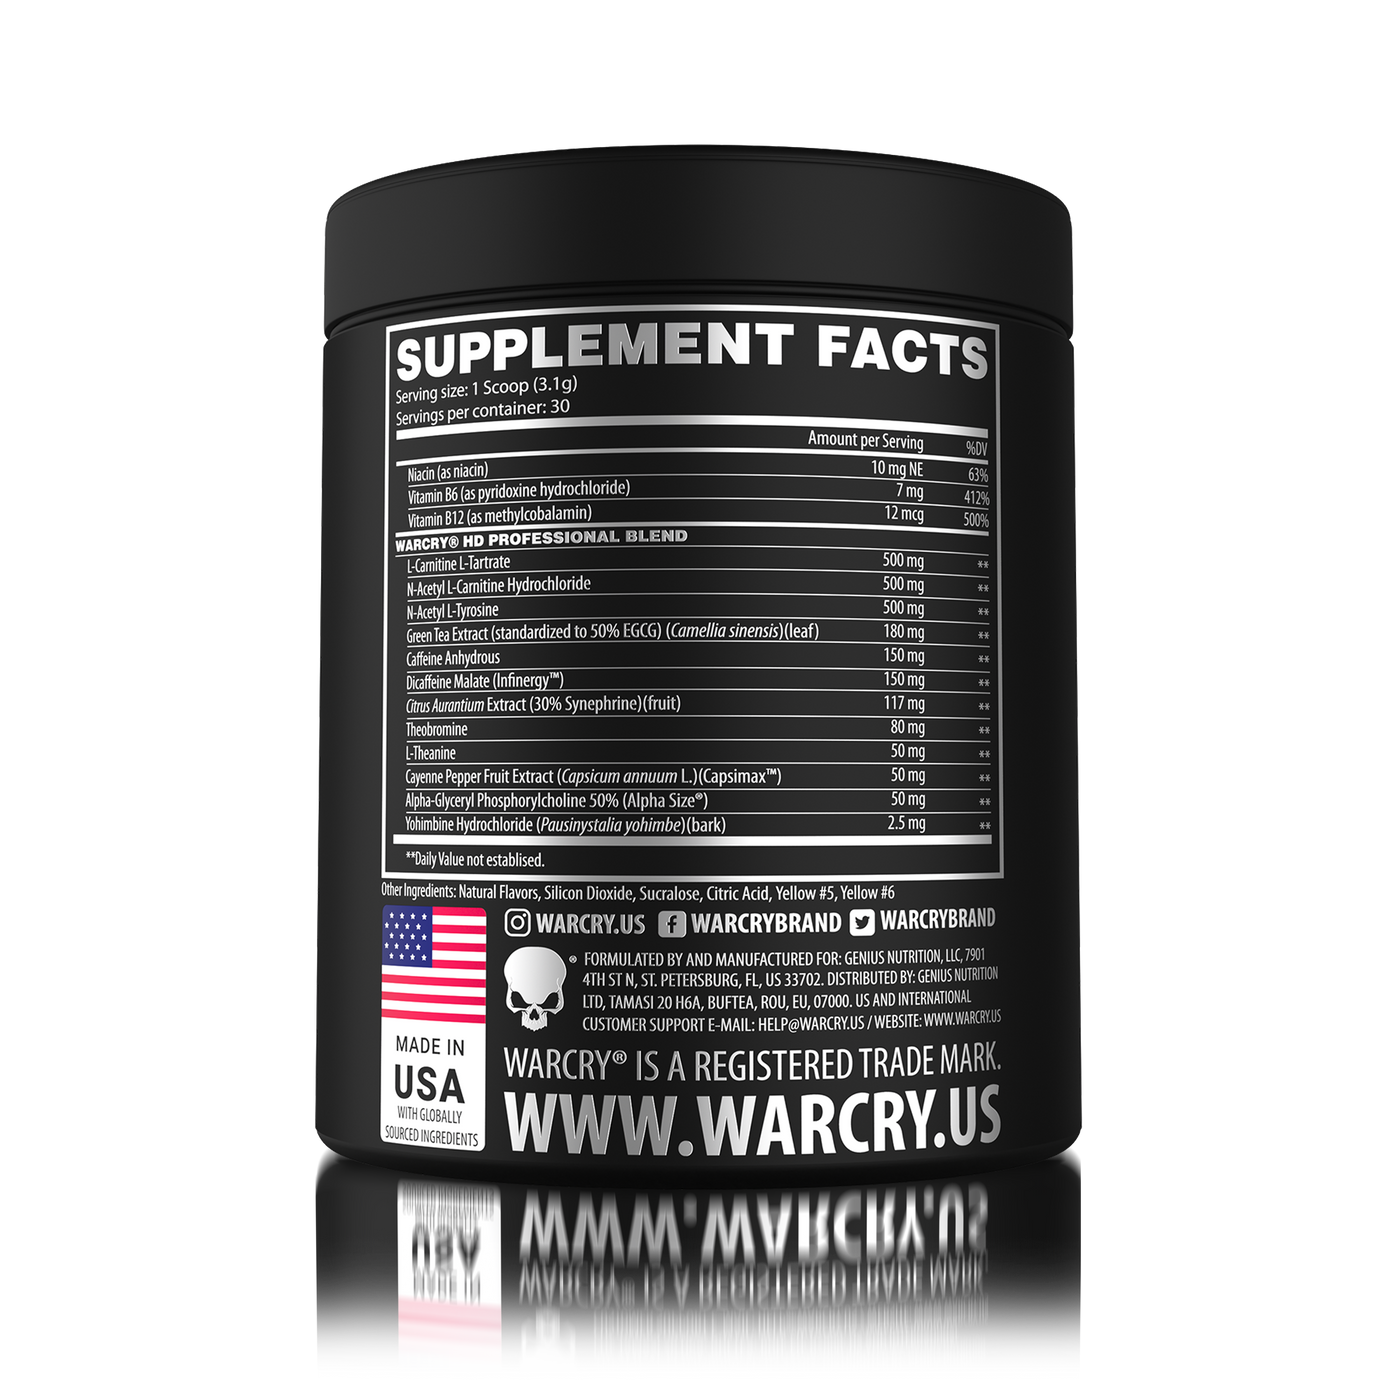 WARCRY HD, Fat Burner, 93g, 30 Servings, Tropical Storm Flavor, Naturally Flavored, Dietary Supplement, Shop now in US, Free Shipping in US